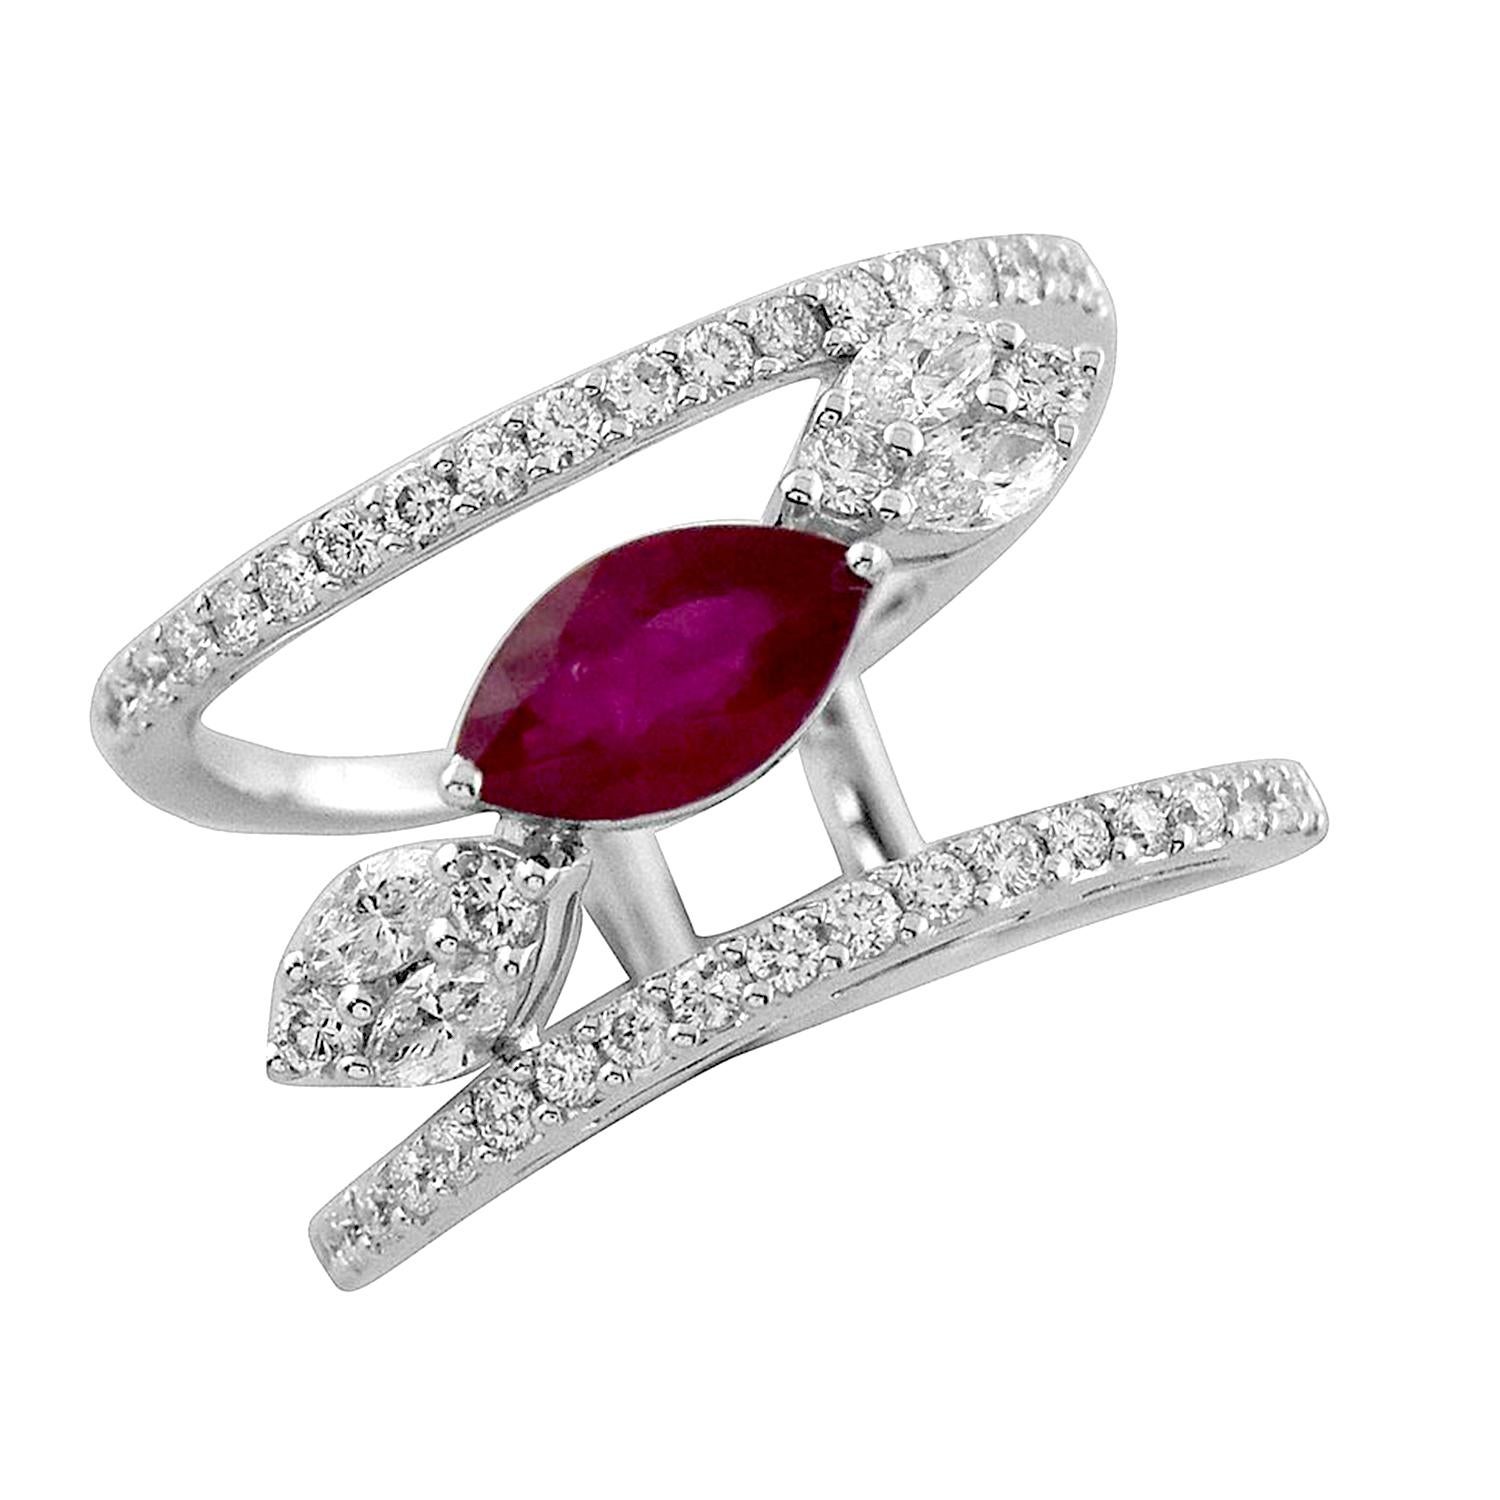 1.03 Ct Marquise Shaped Ruby Wide Ring With Diamonds Made In 18k White Gold In New Condition For Sale In New York, NY